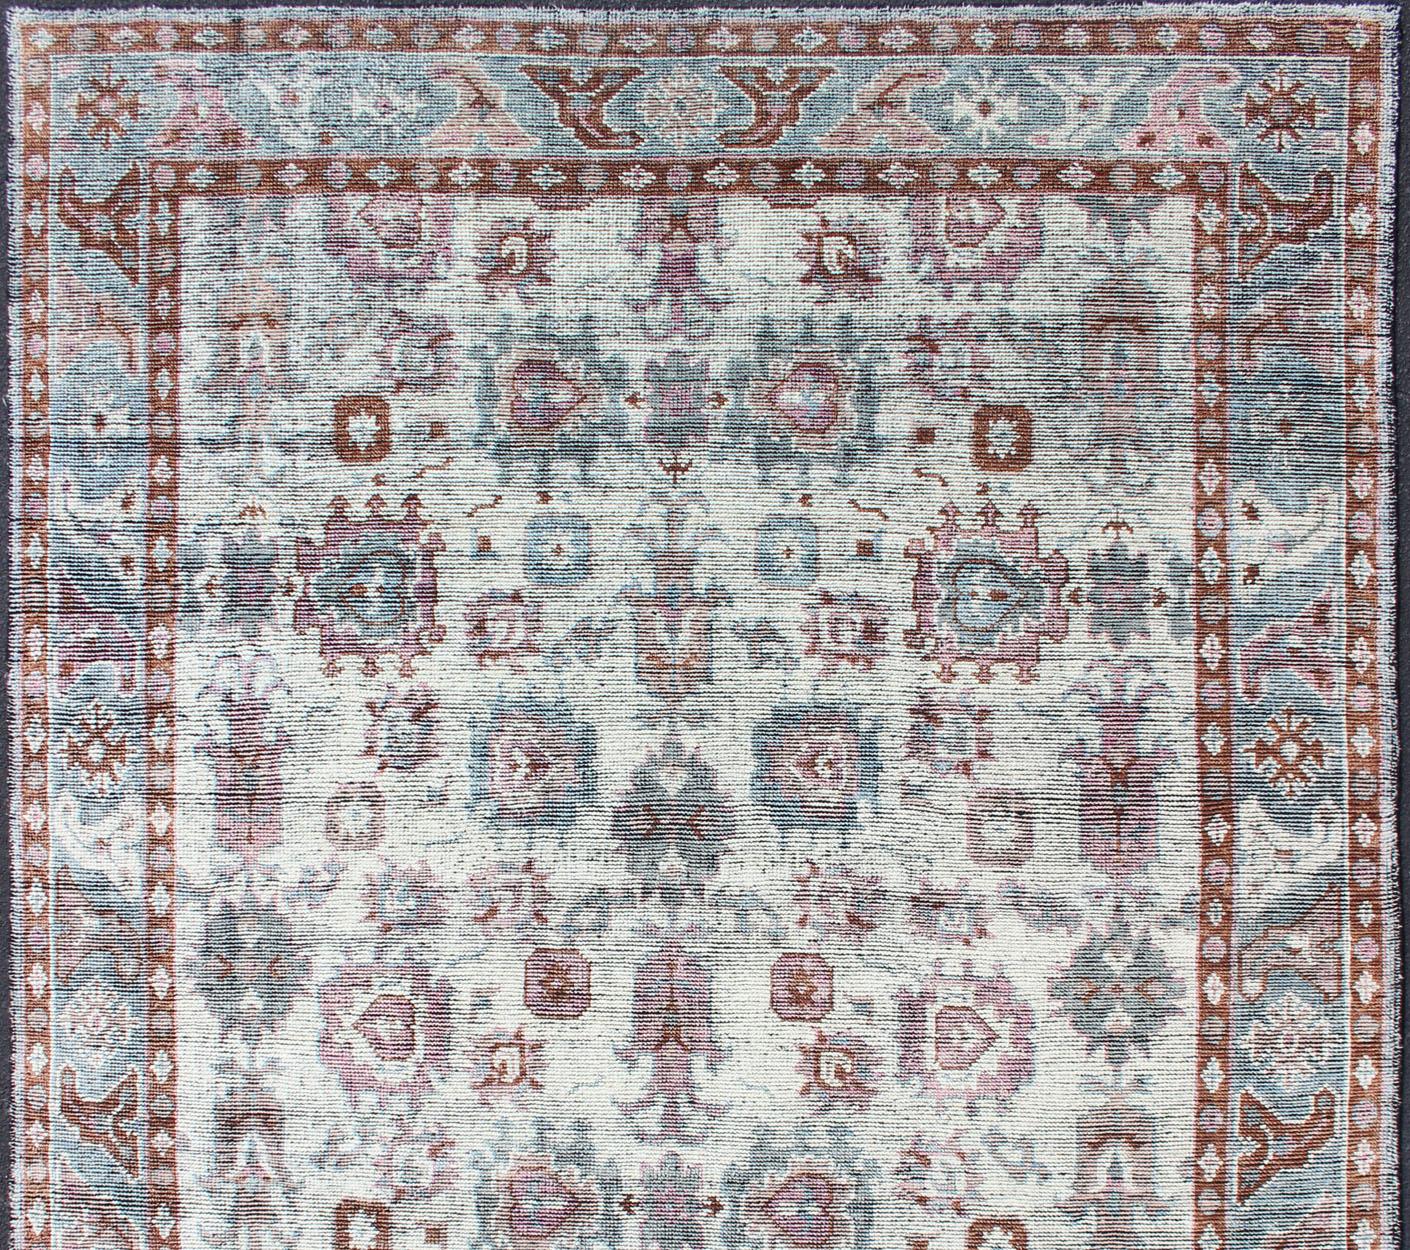 Distressed multi colored design Indian piled rug, rug KHN-1026-TR-781, country of origin / type: India / Modern Piled rug.

A unique blend of historical and modern design, this dynamic and exciting composition is beautifully suited for both